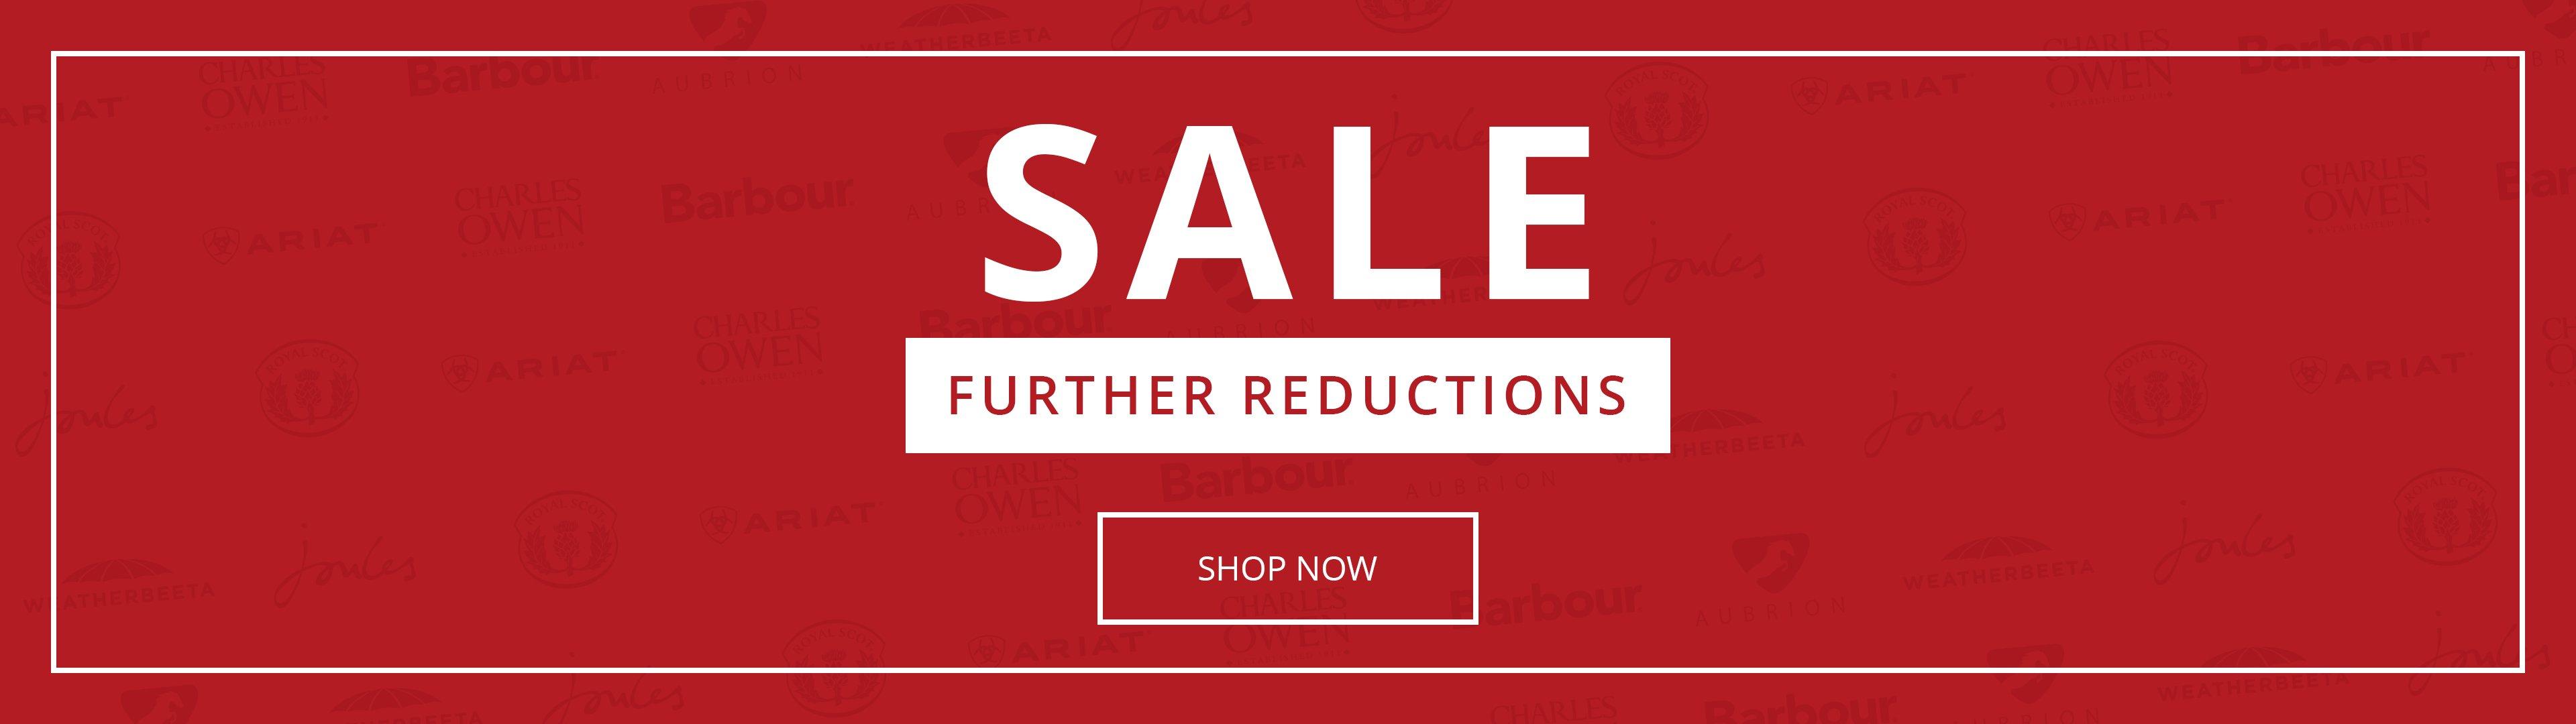 Sale Further Reductions